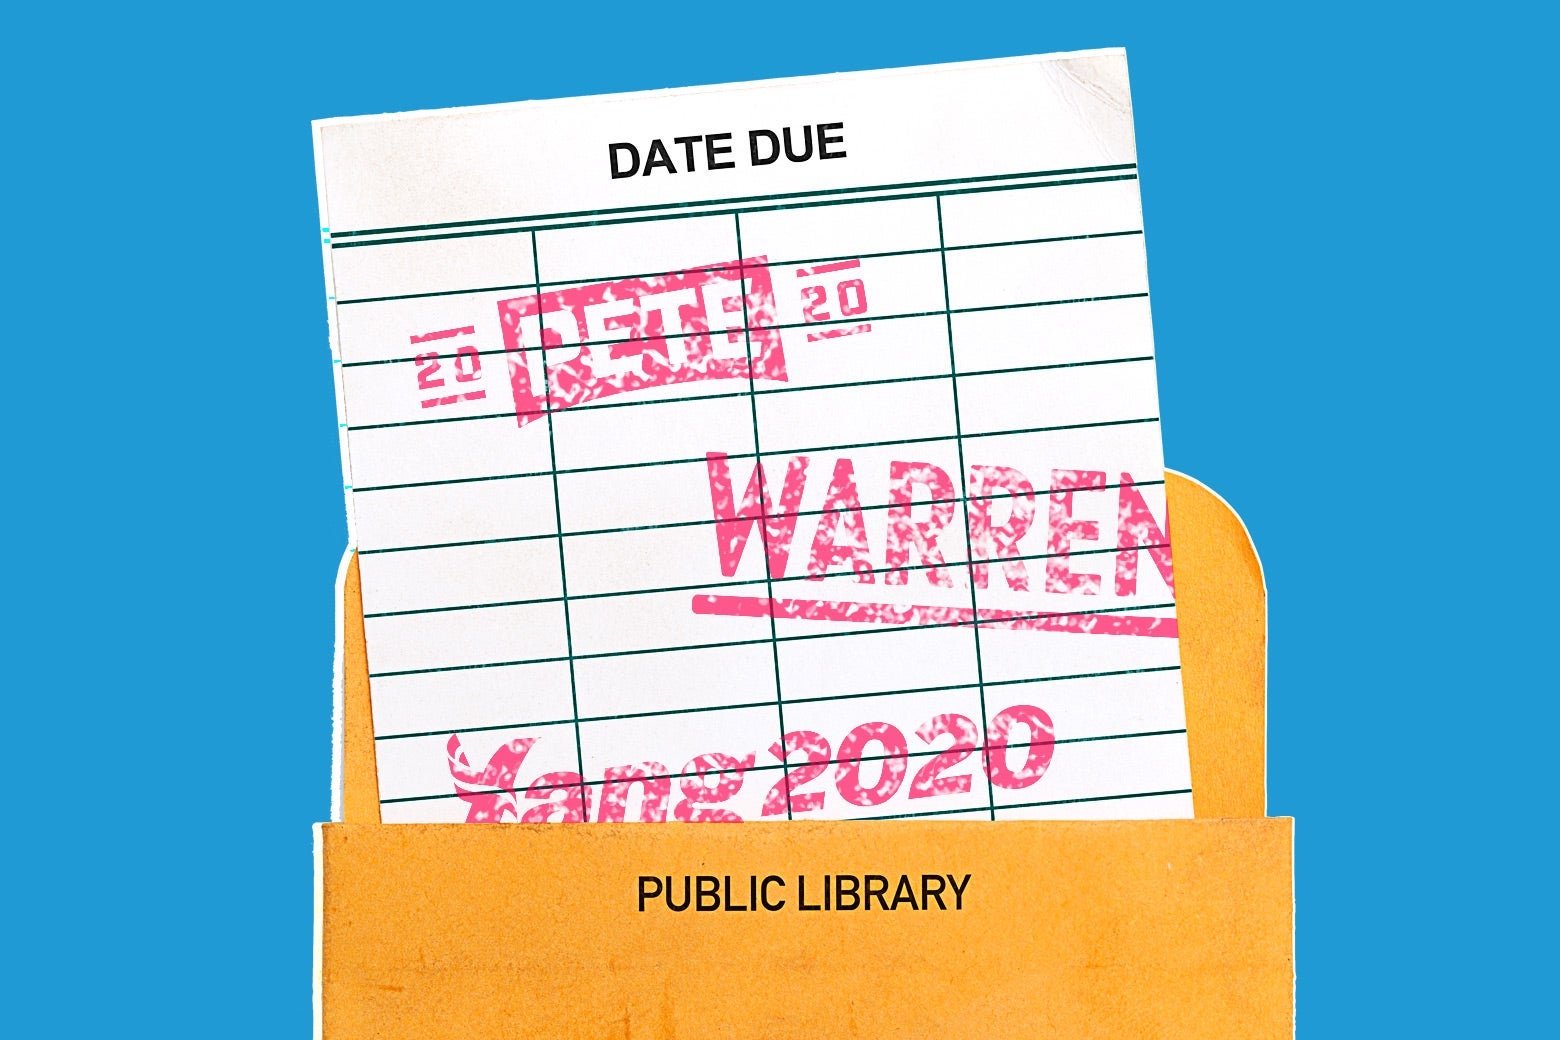 A library due date slip stamped with Democratic campaign logos.